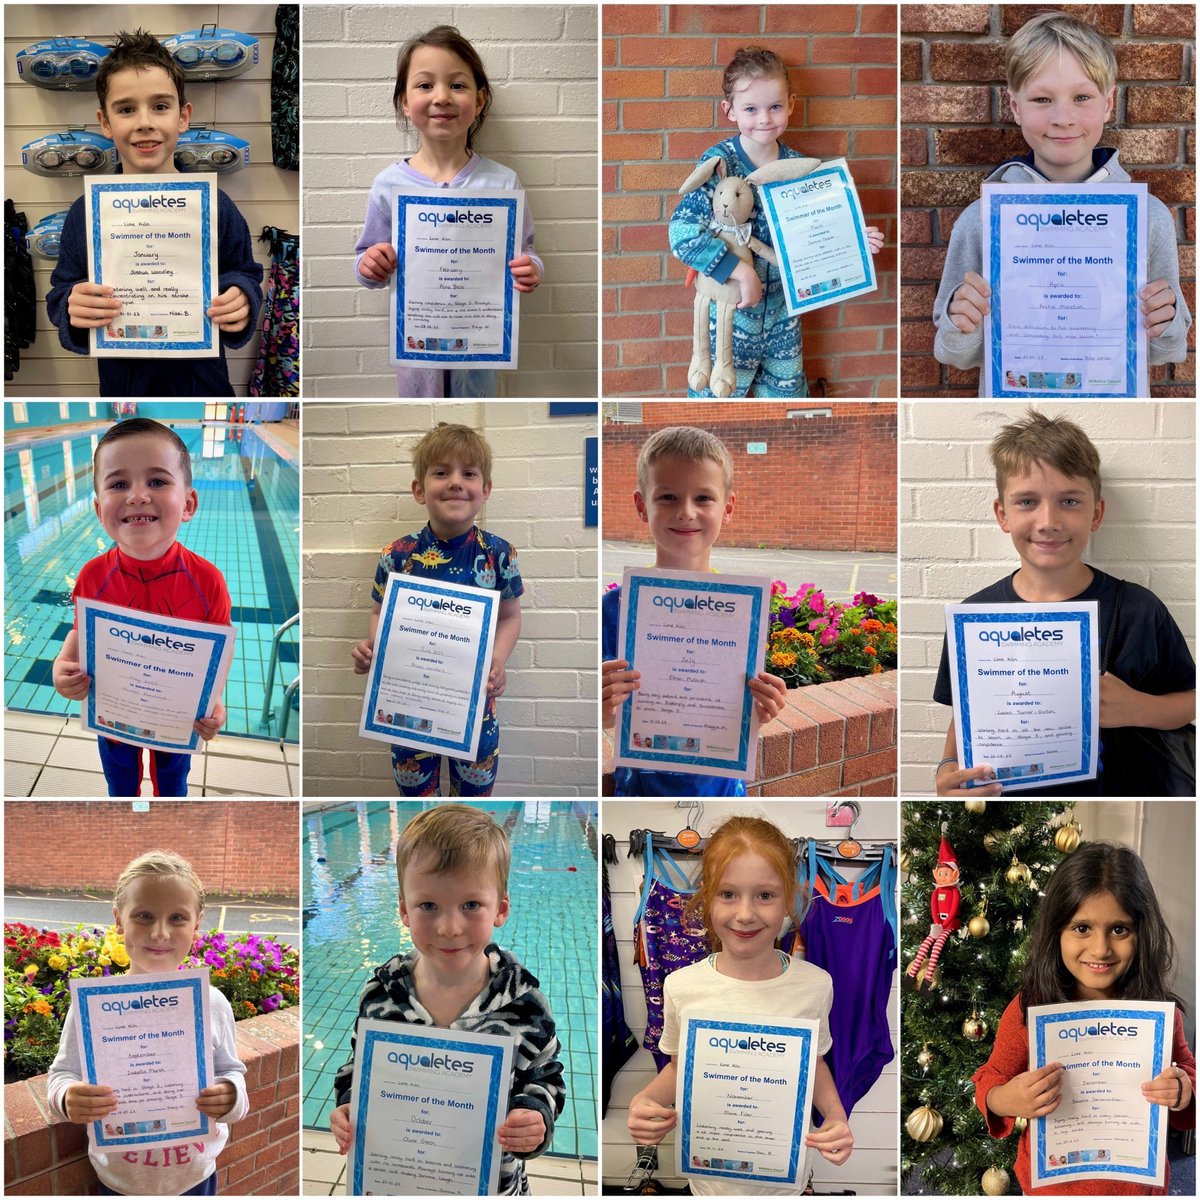 Thank you to our swimming teachers who deliver weekly lessons to nearly 12,000 children across the county. Our teachers work exceptionally hard to engage and support children to build confidence in the water, enjoy swimming and develop water skills. 😃 #WeAreWilts